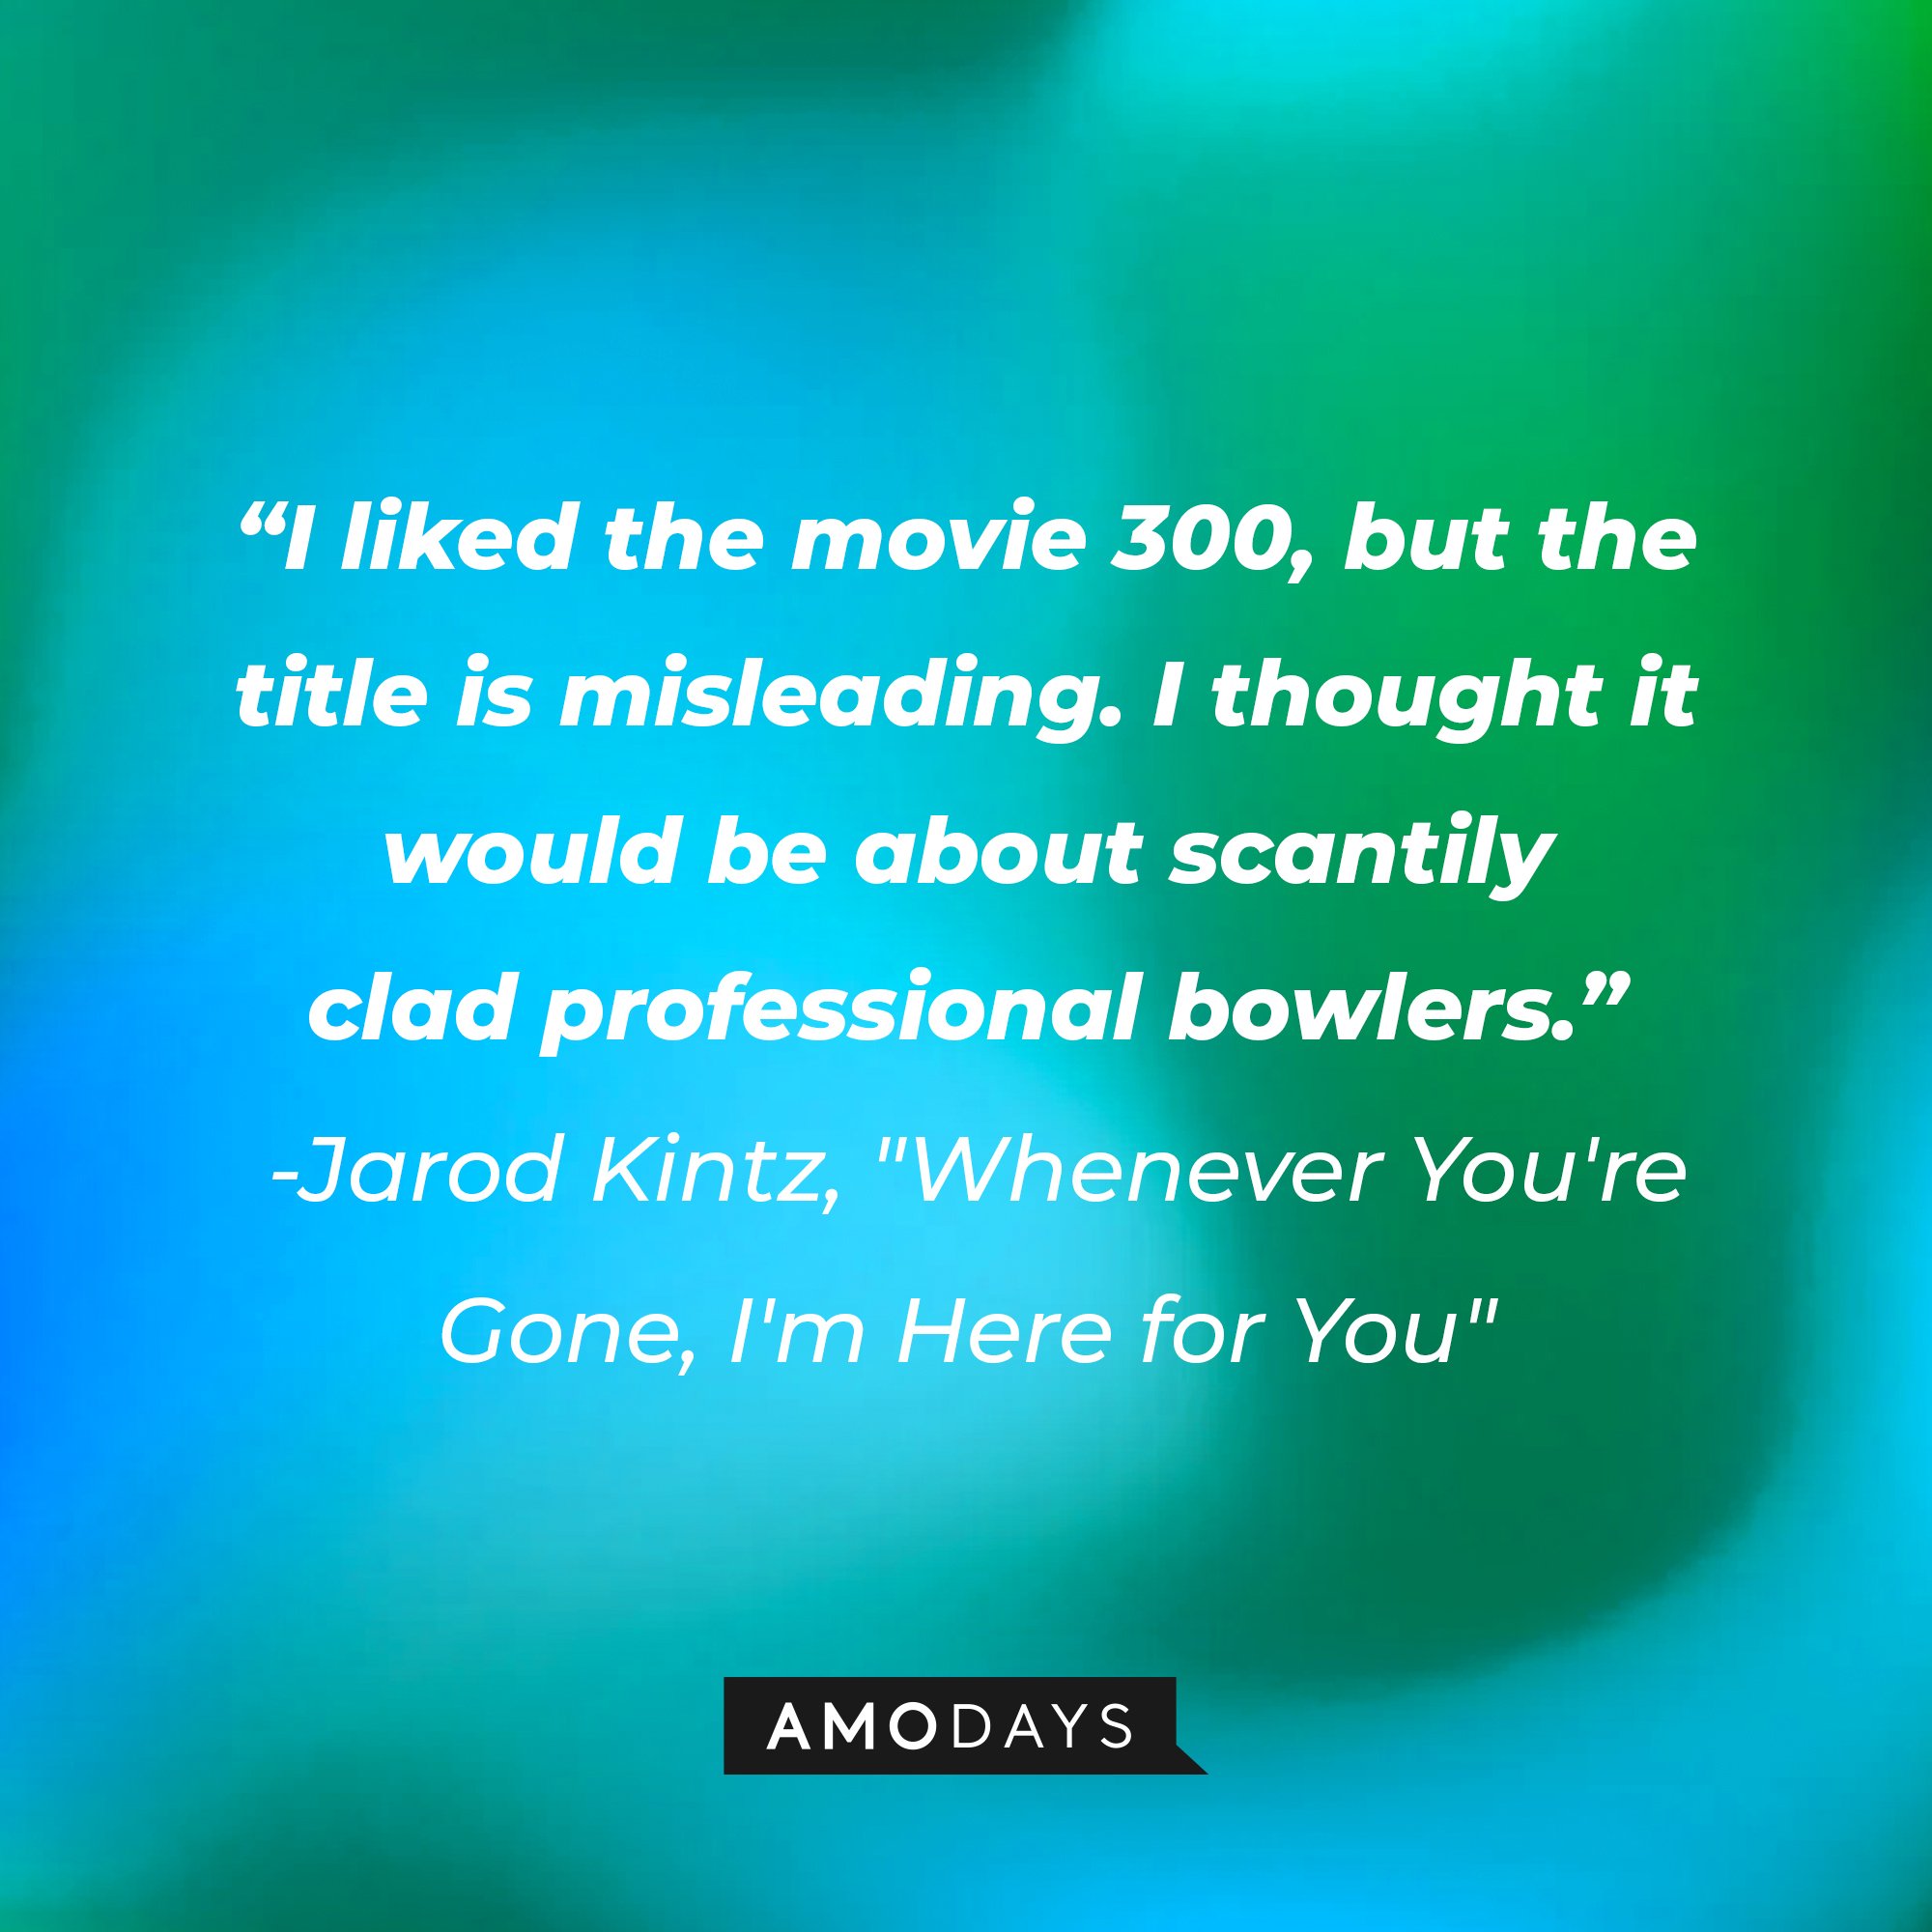 Jarod Kintz's "Whenever You're Gone, I'm Here for You" quote: "I liked the movie 300, but the title is misleading. I thought it would be about scantily clad professional bowlers." | Image: AmoDays